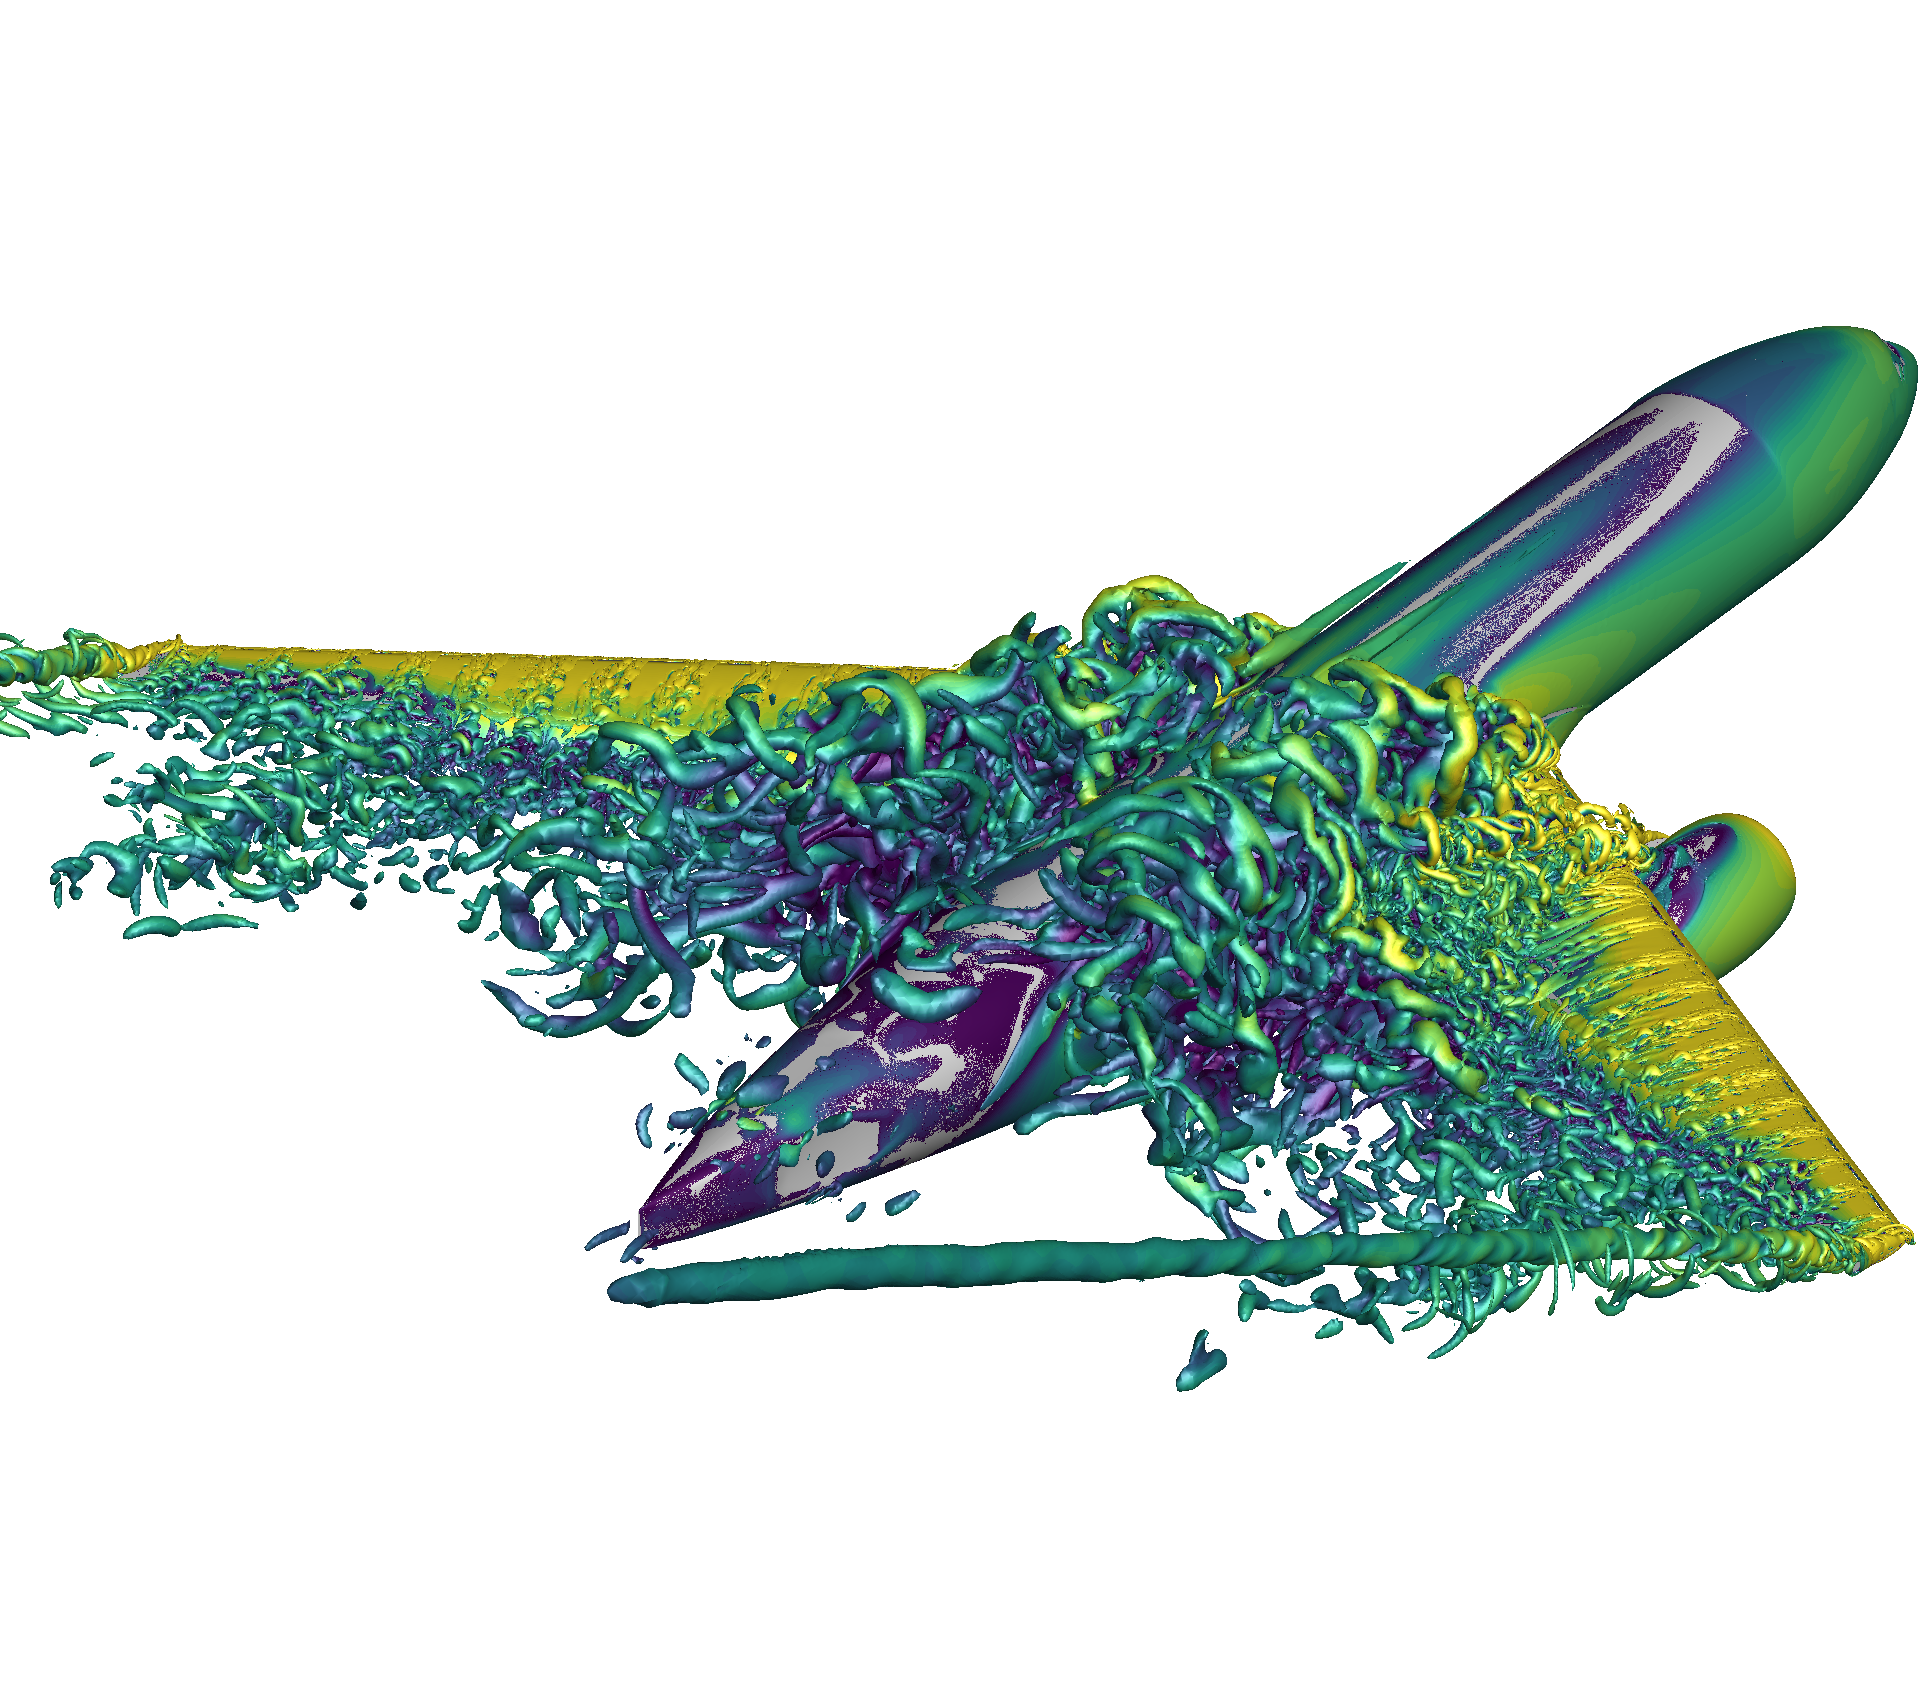 CFD Simulation Methods for High-Lift Aircraft Configurations (Part 2 of 3)